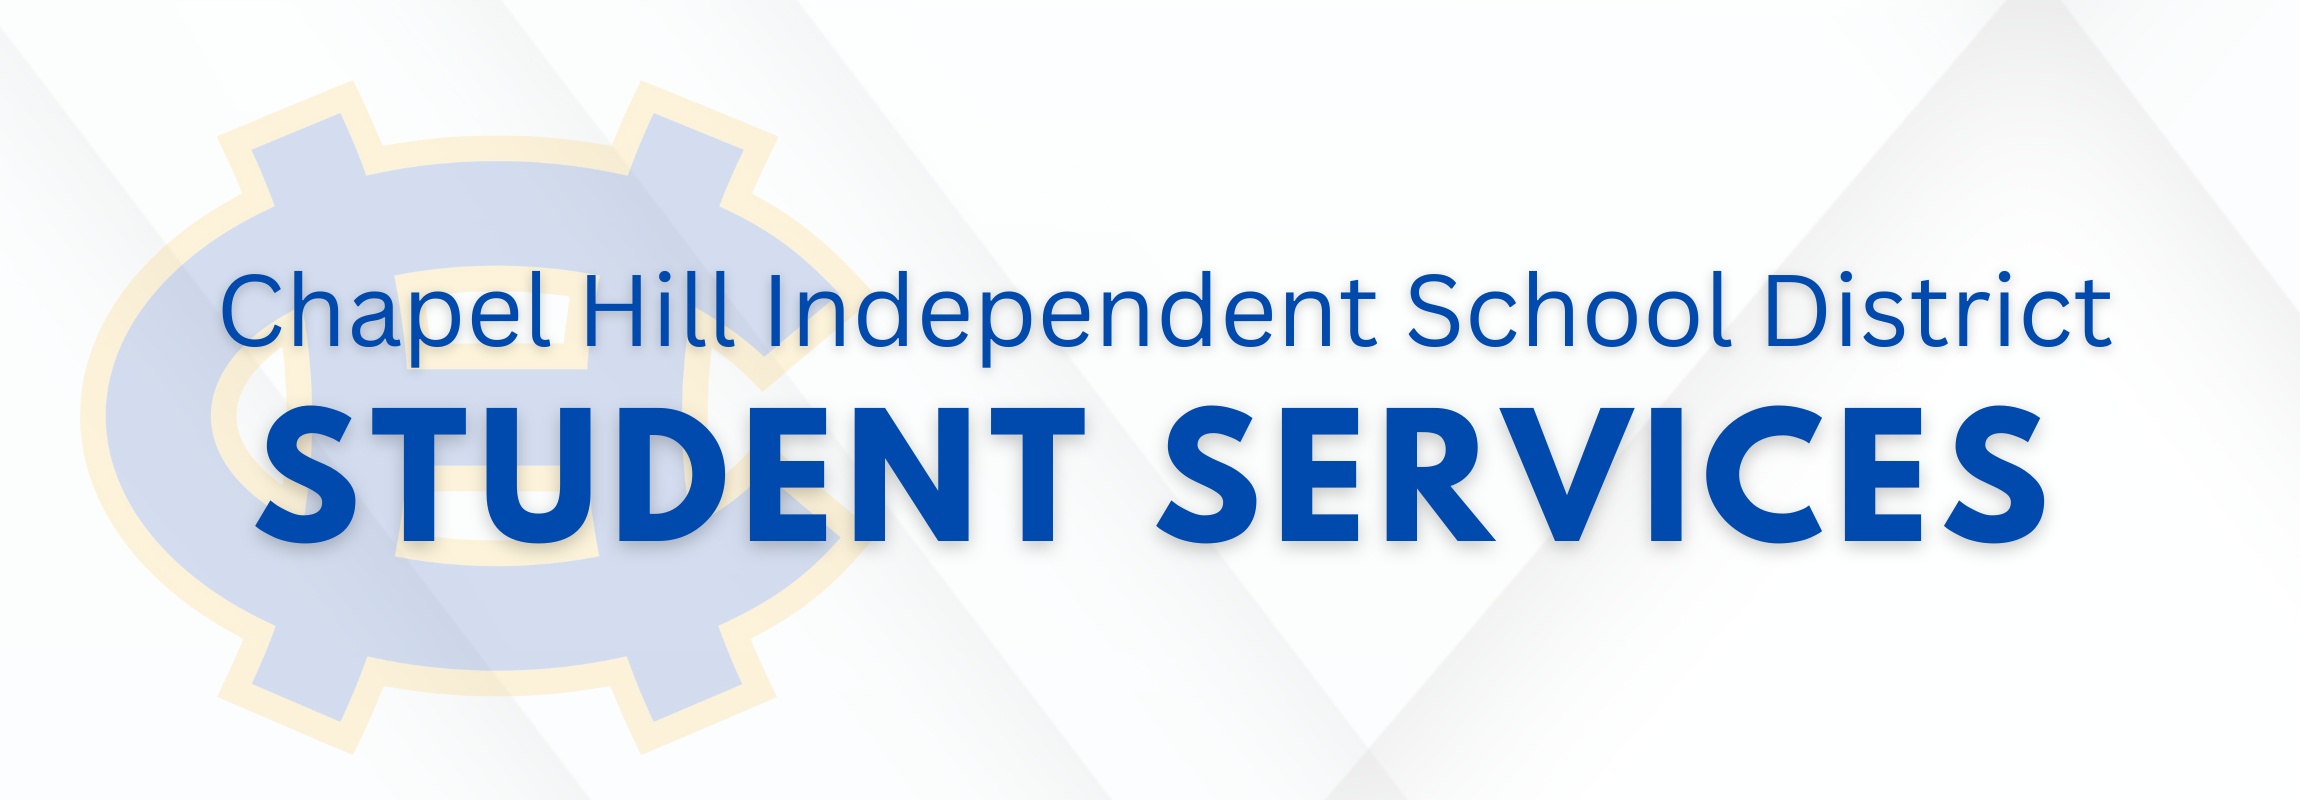 Chapel Hill ISD Student Services